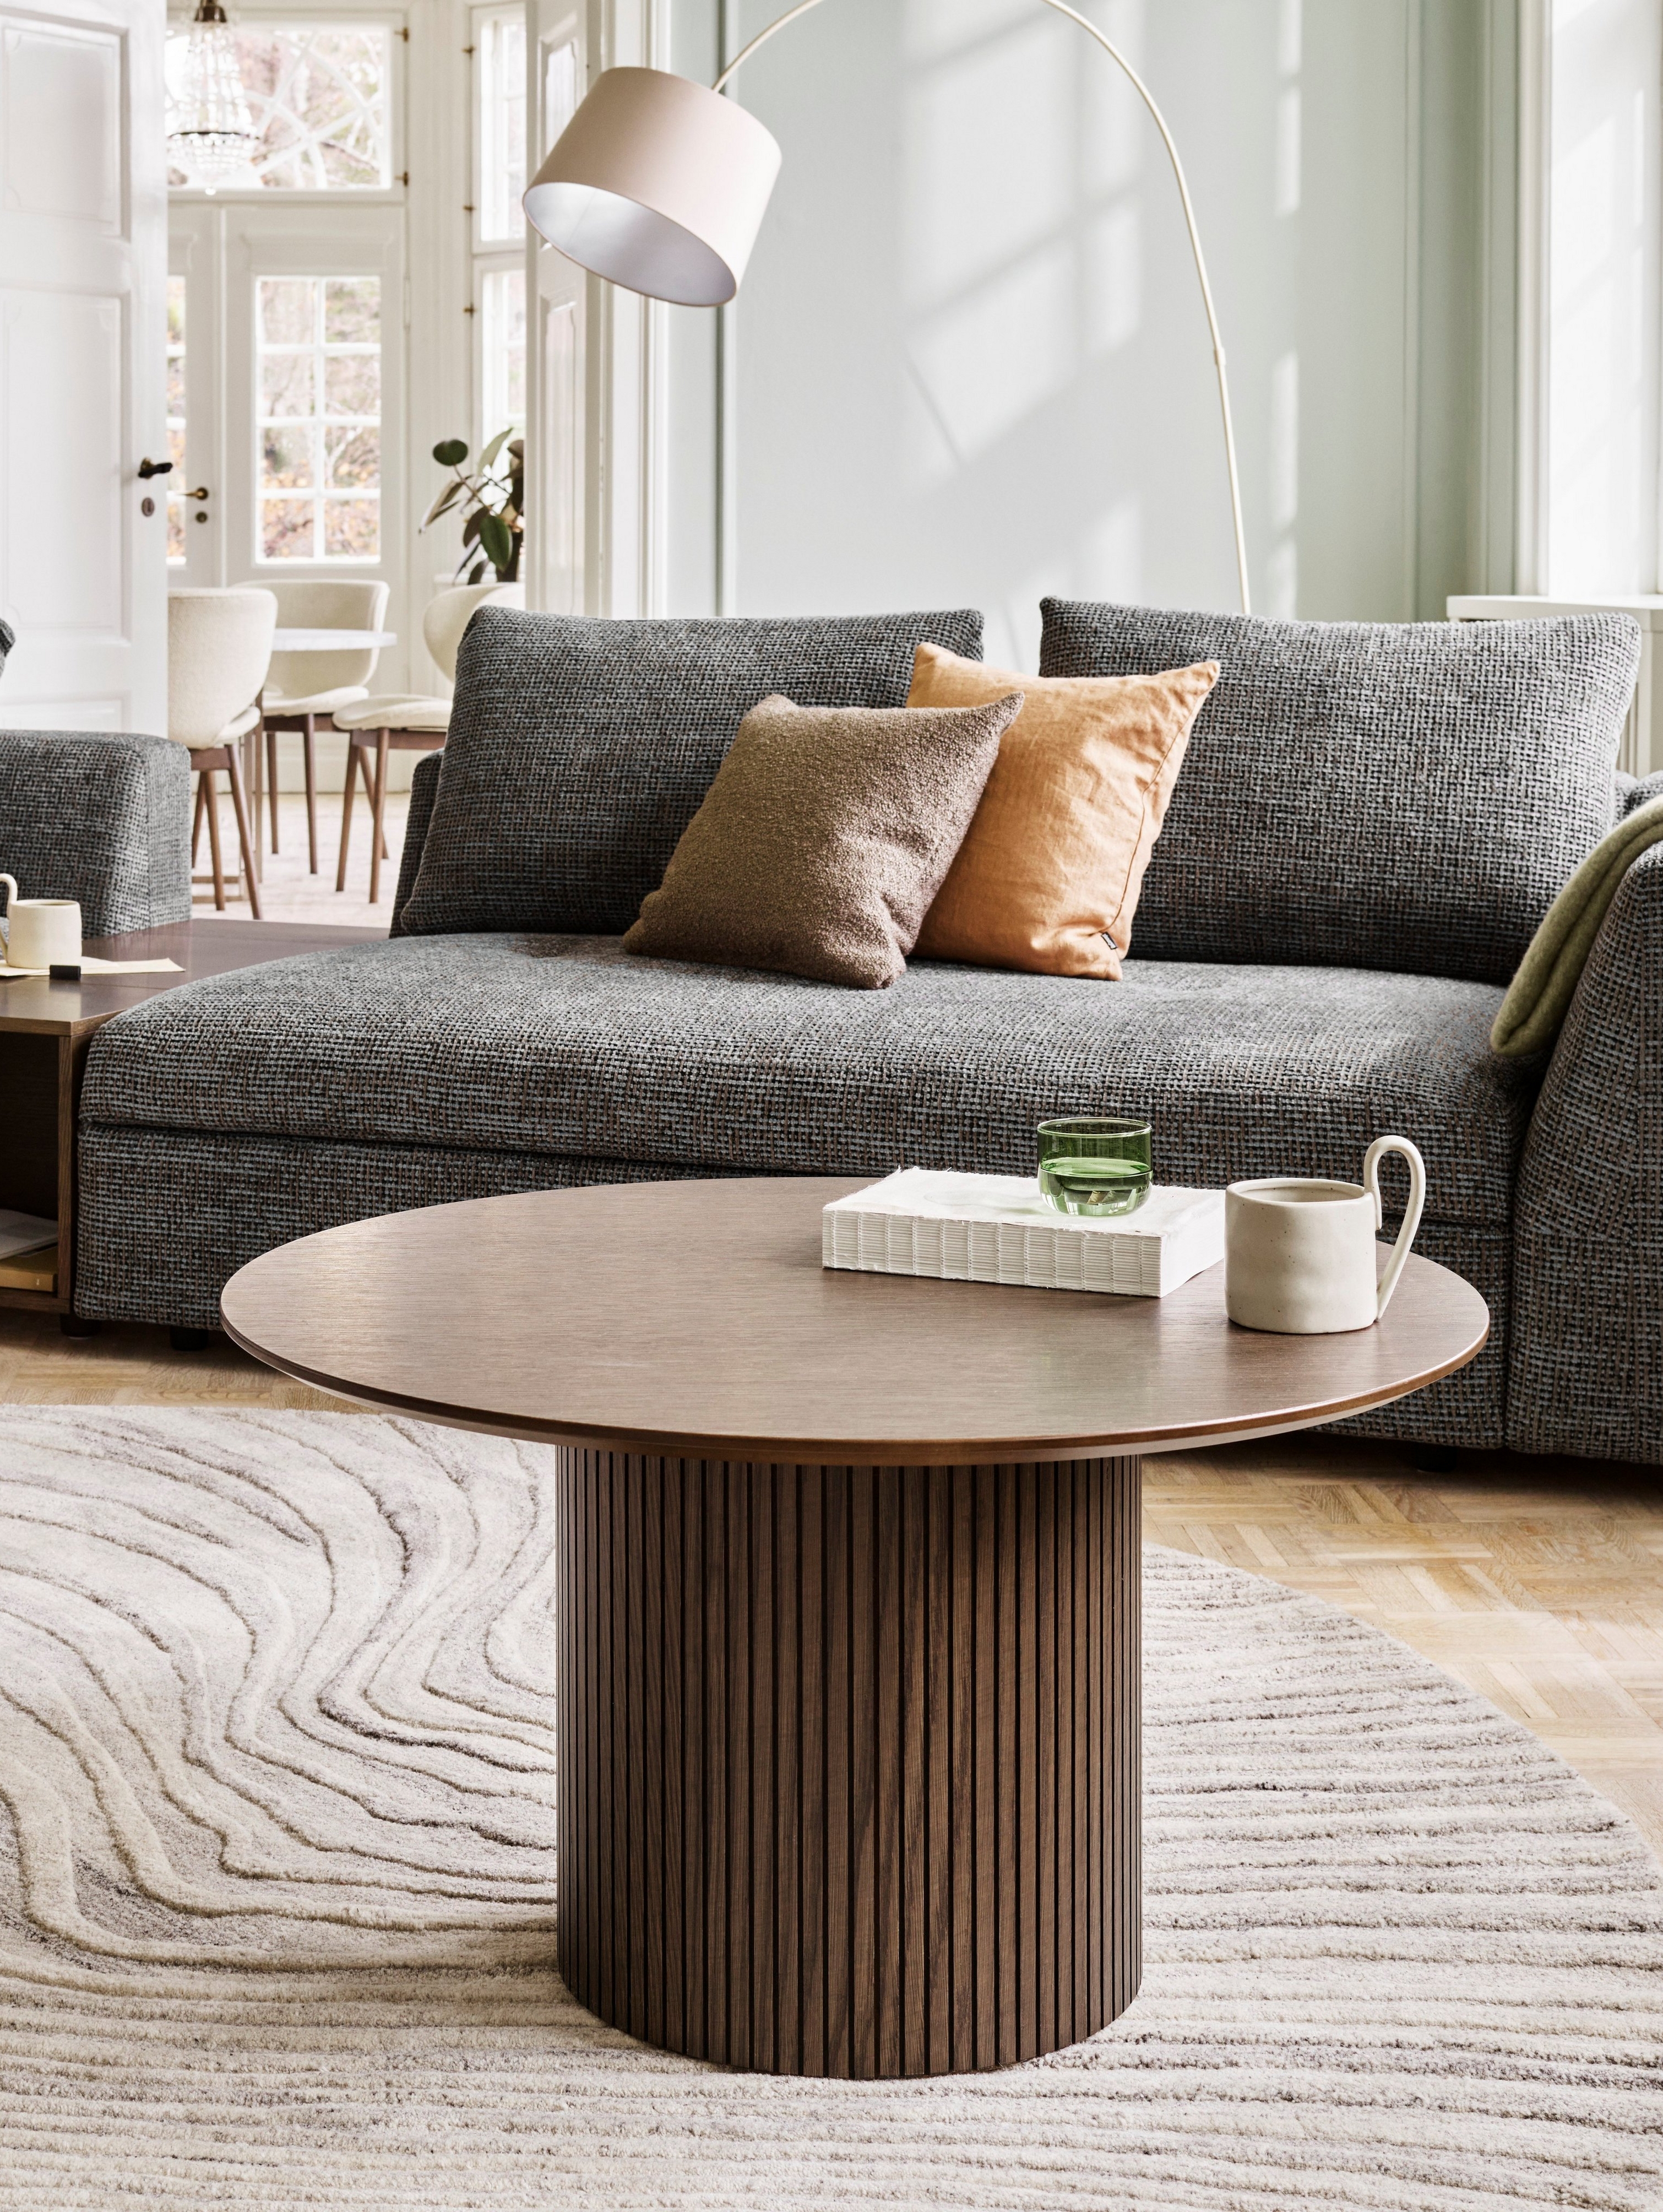 Cozy living space featuring the Bergamo sofa and the Santiago coffee table